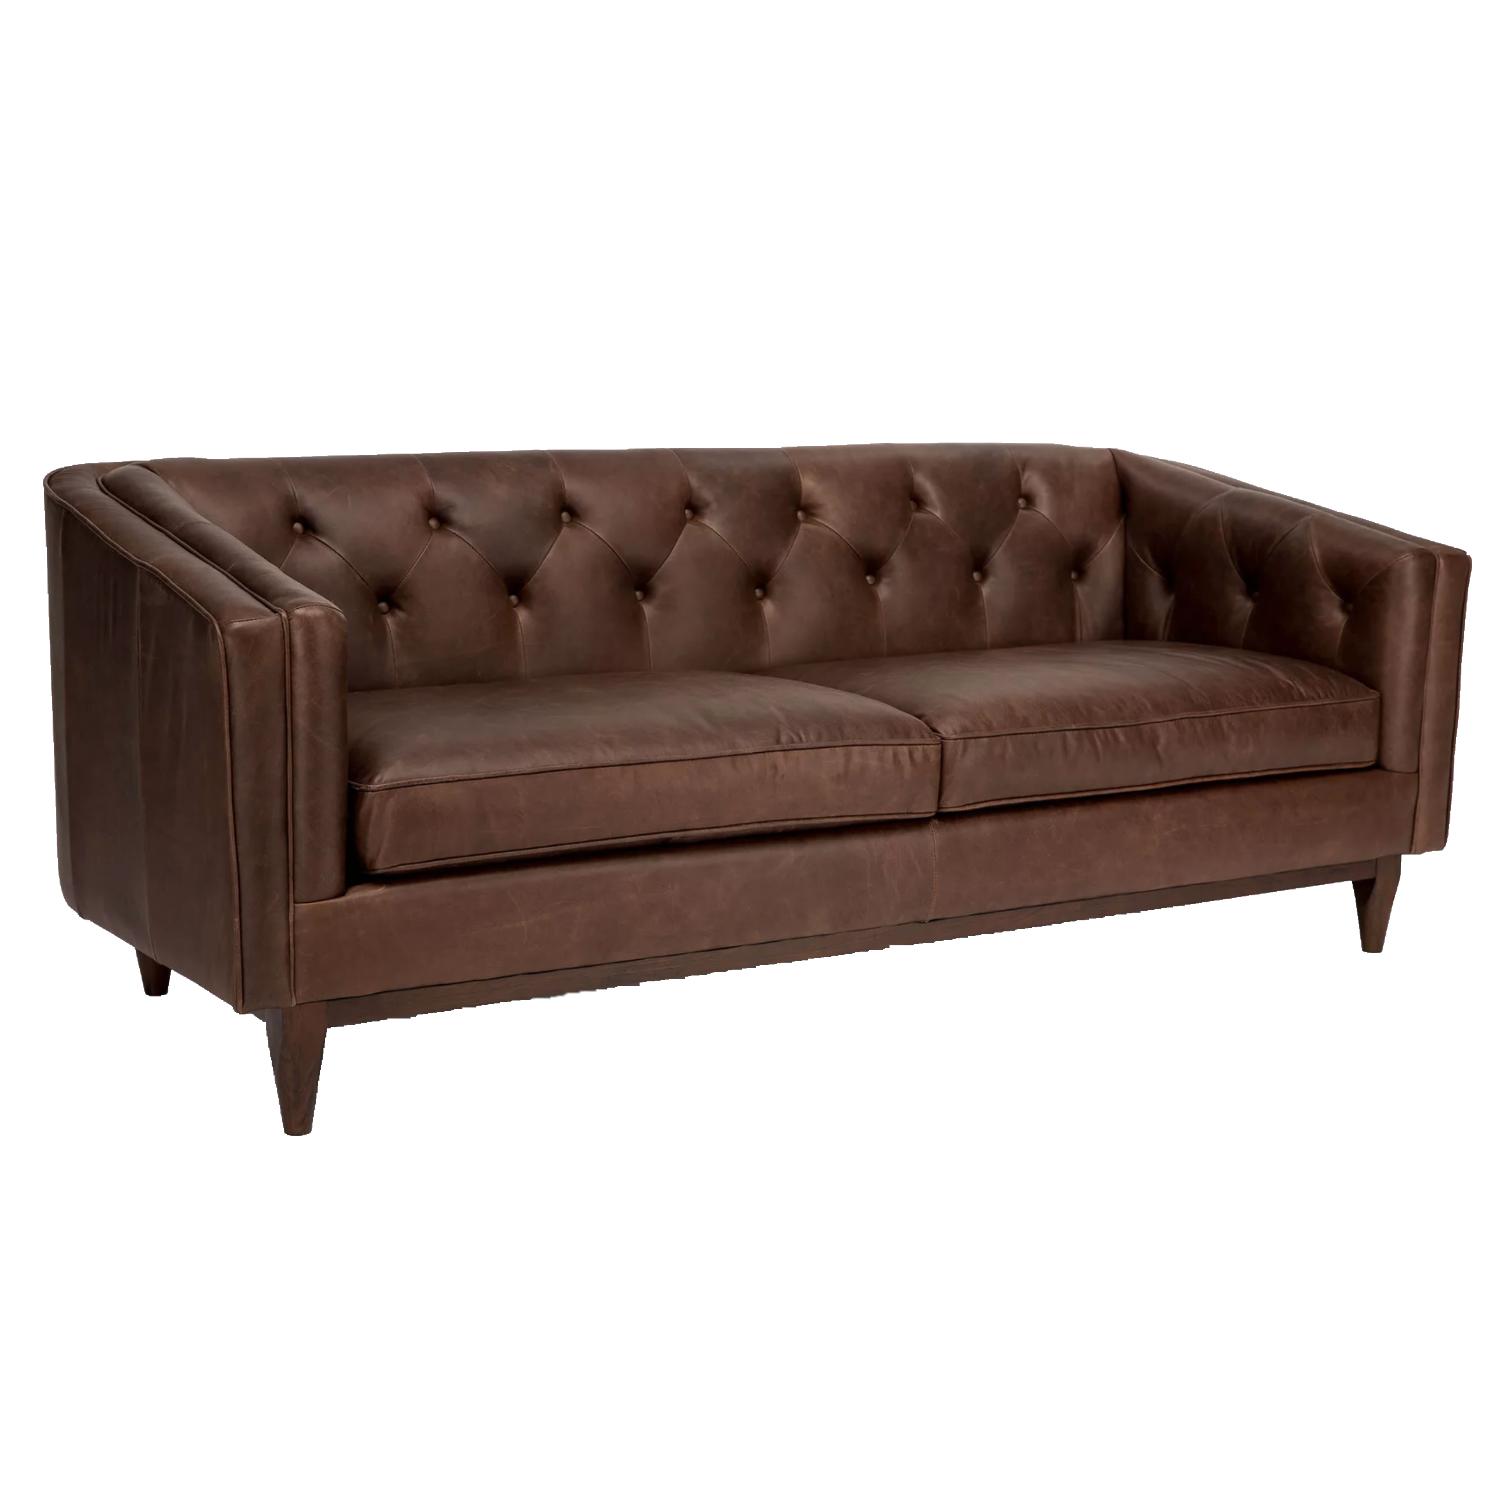 Alcott Tufted Leather Sofa - Brown